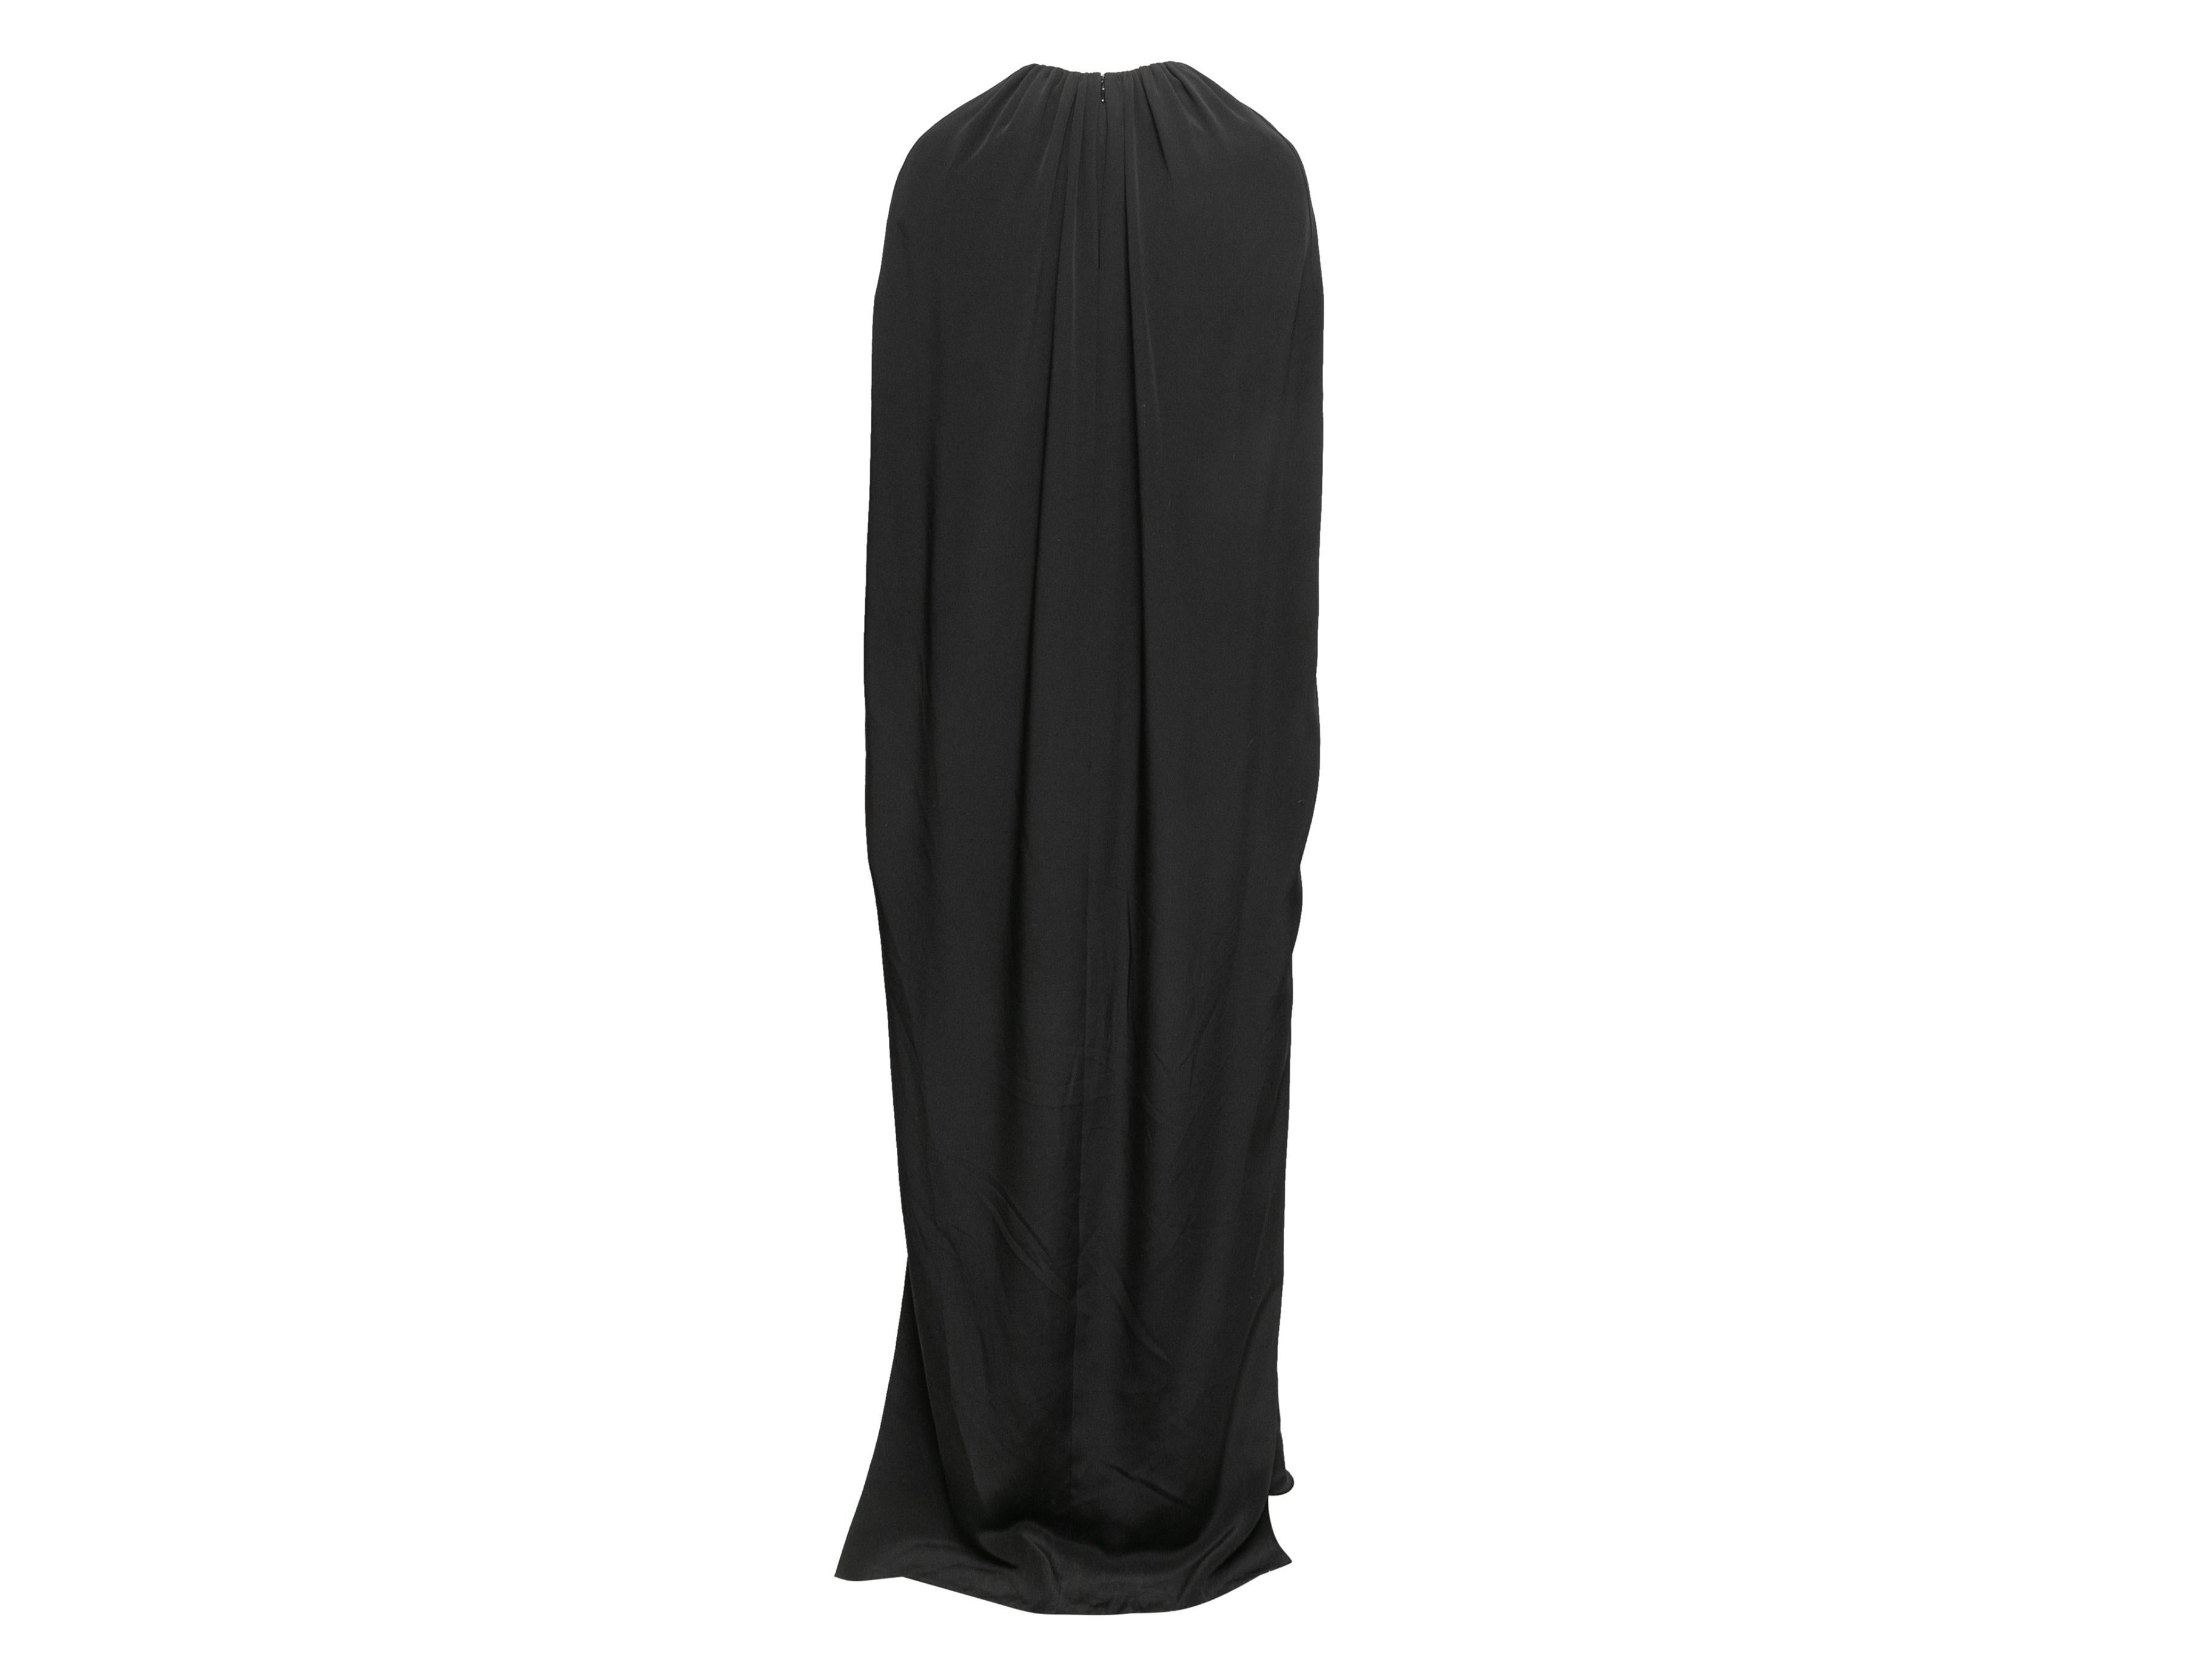 Black silk tailored cape gown by Brandon Maxwell. Ruching at crew neckline. Zip closure at center back. 34